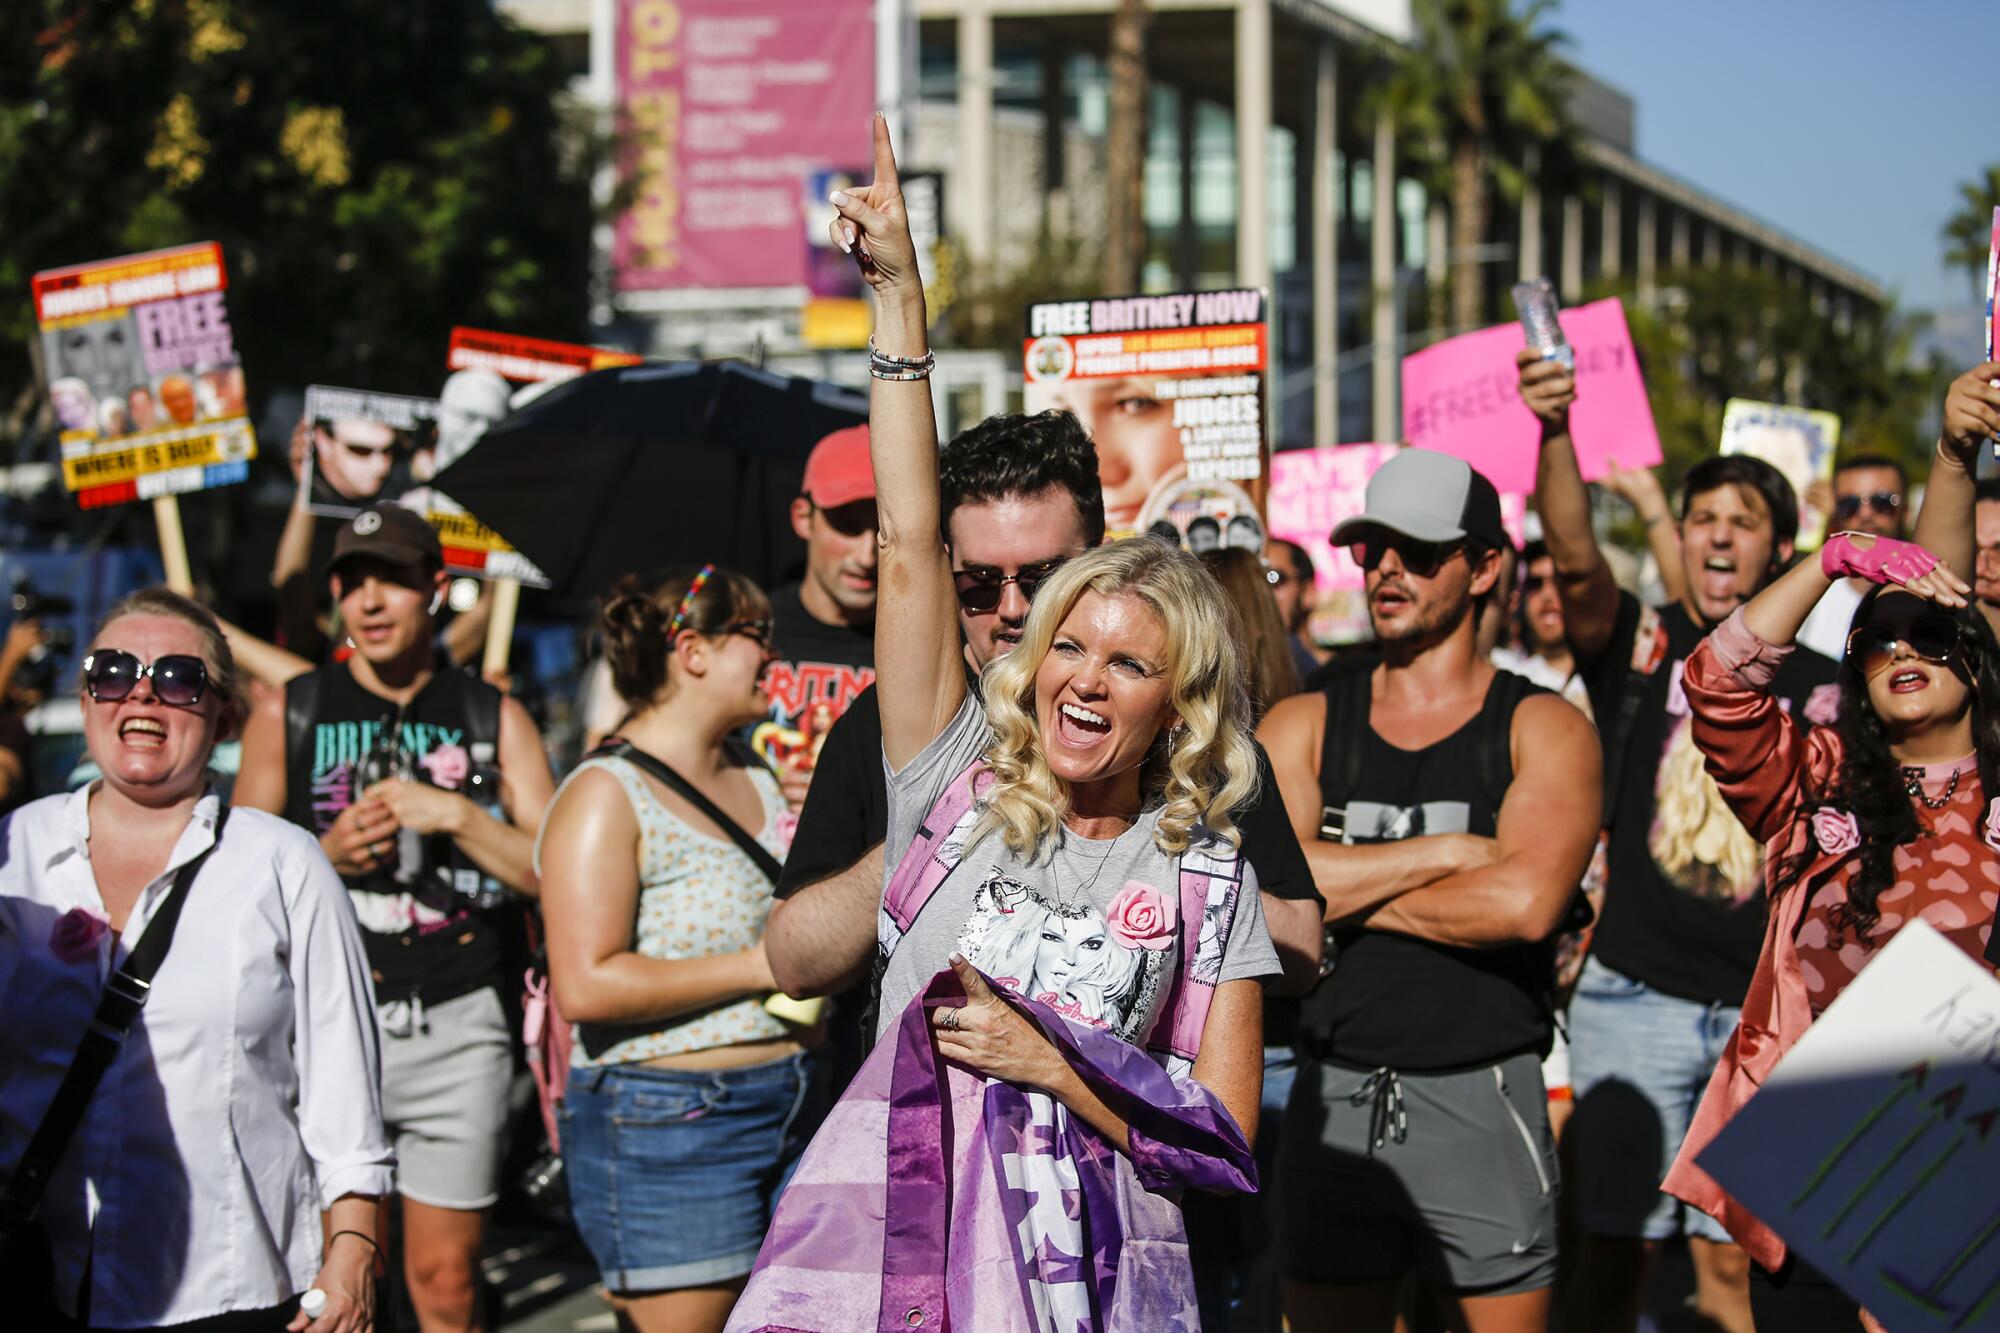 Free Britney supporters celebrate 